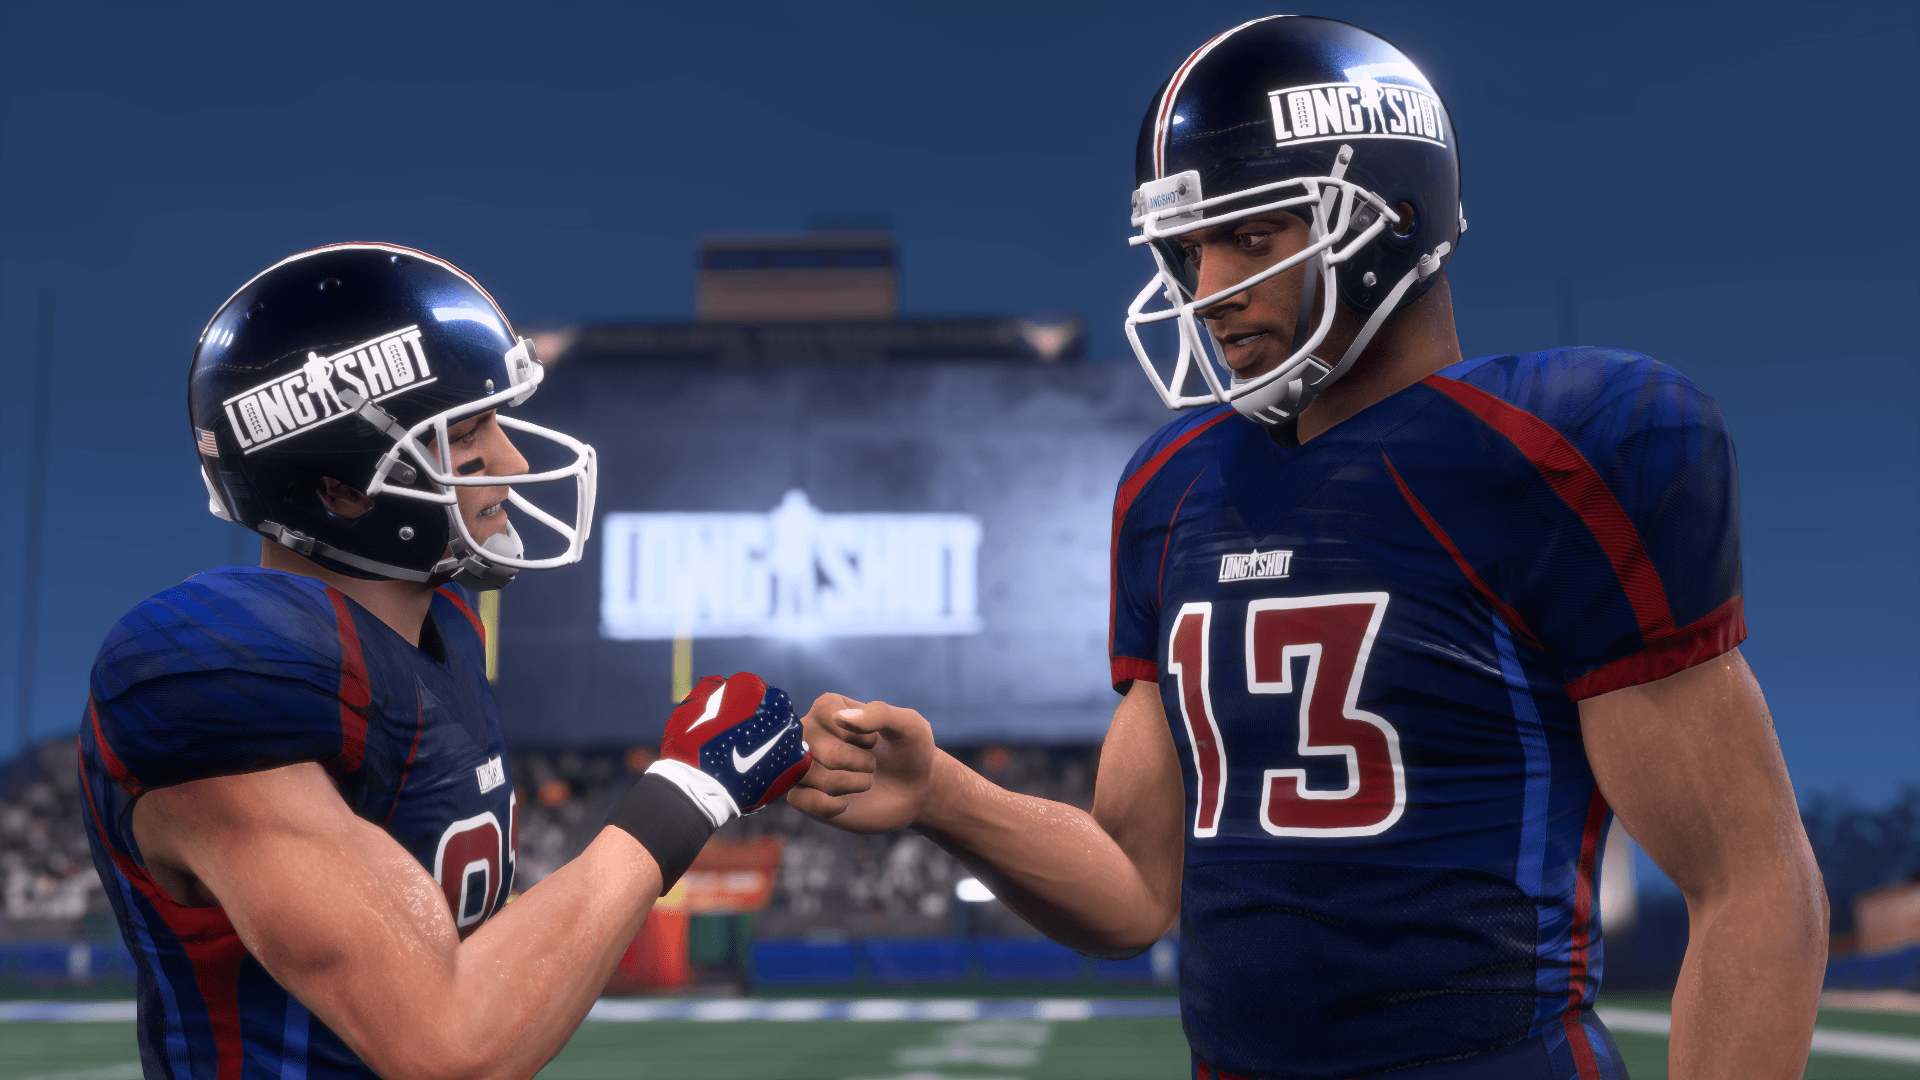 NFL 18 Review - At the Top of Their Game